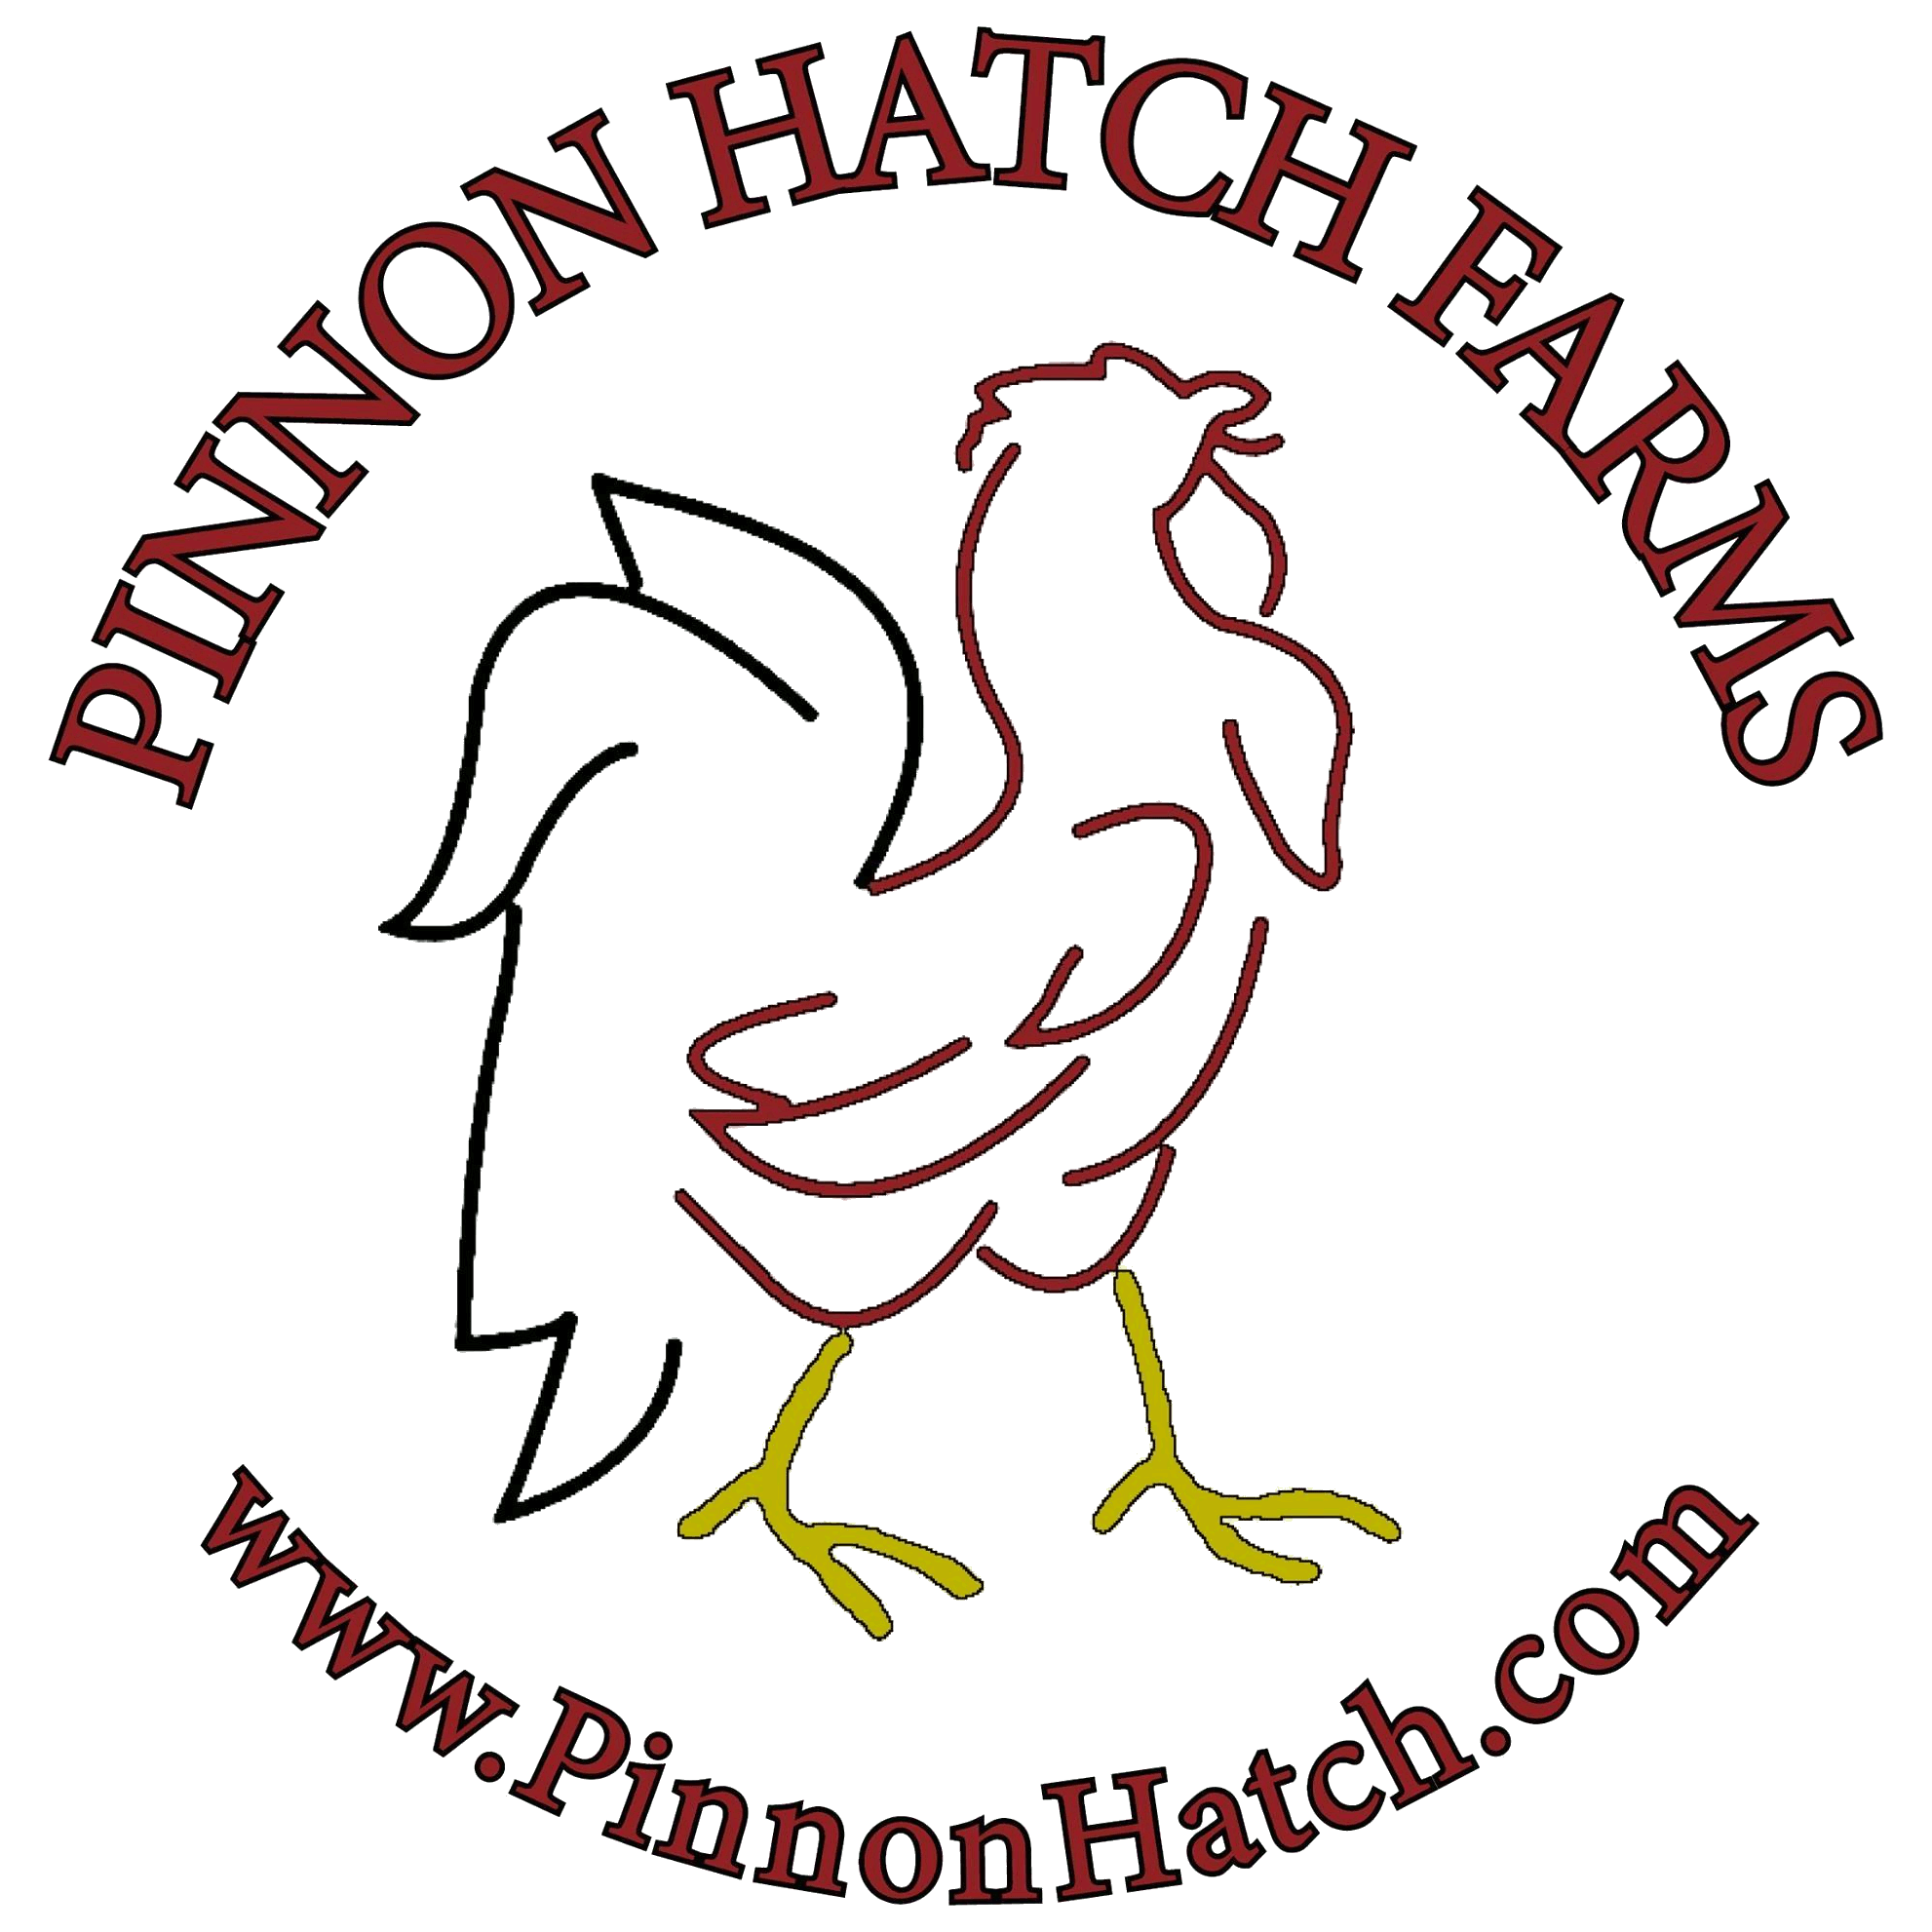 100 Pinnon Hatch Farms Jiffy Wing Bands Custom Stamped Brass Gamefowl Chicken Pheasant Poultry Duck Quail Chucker